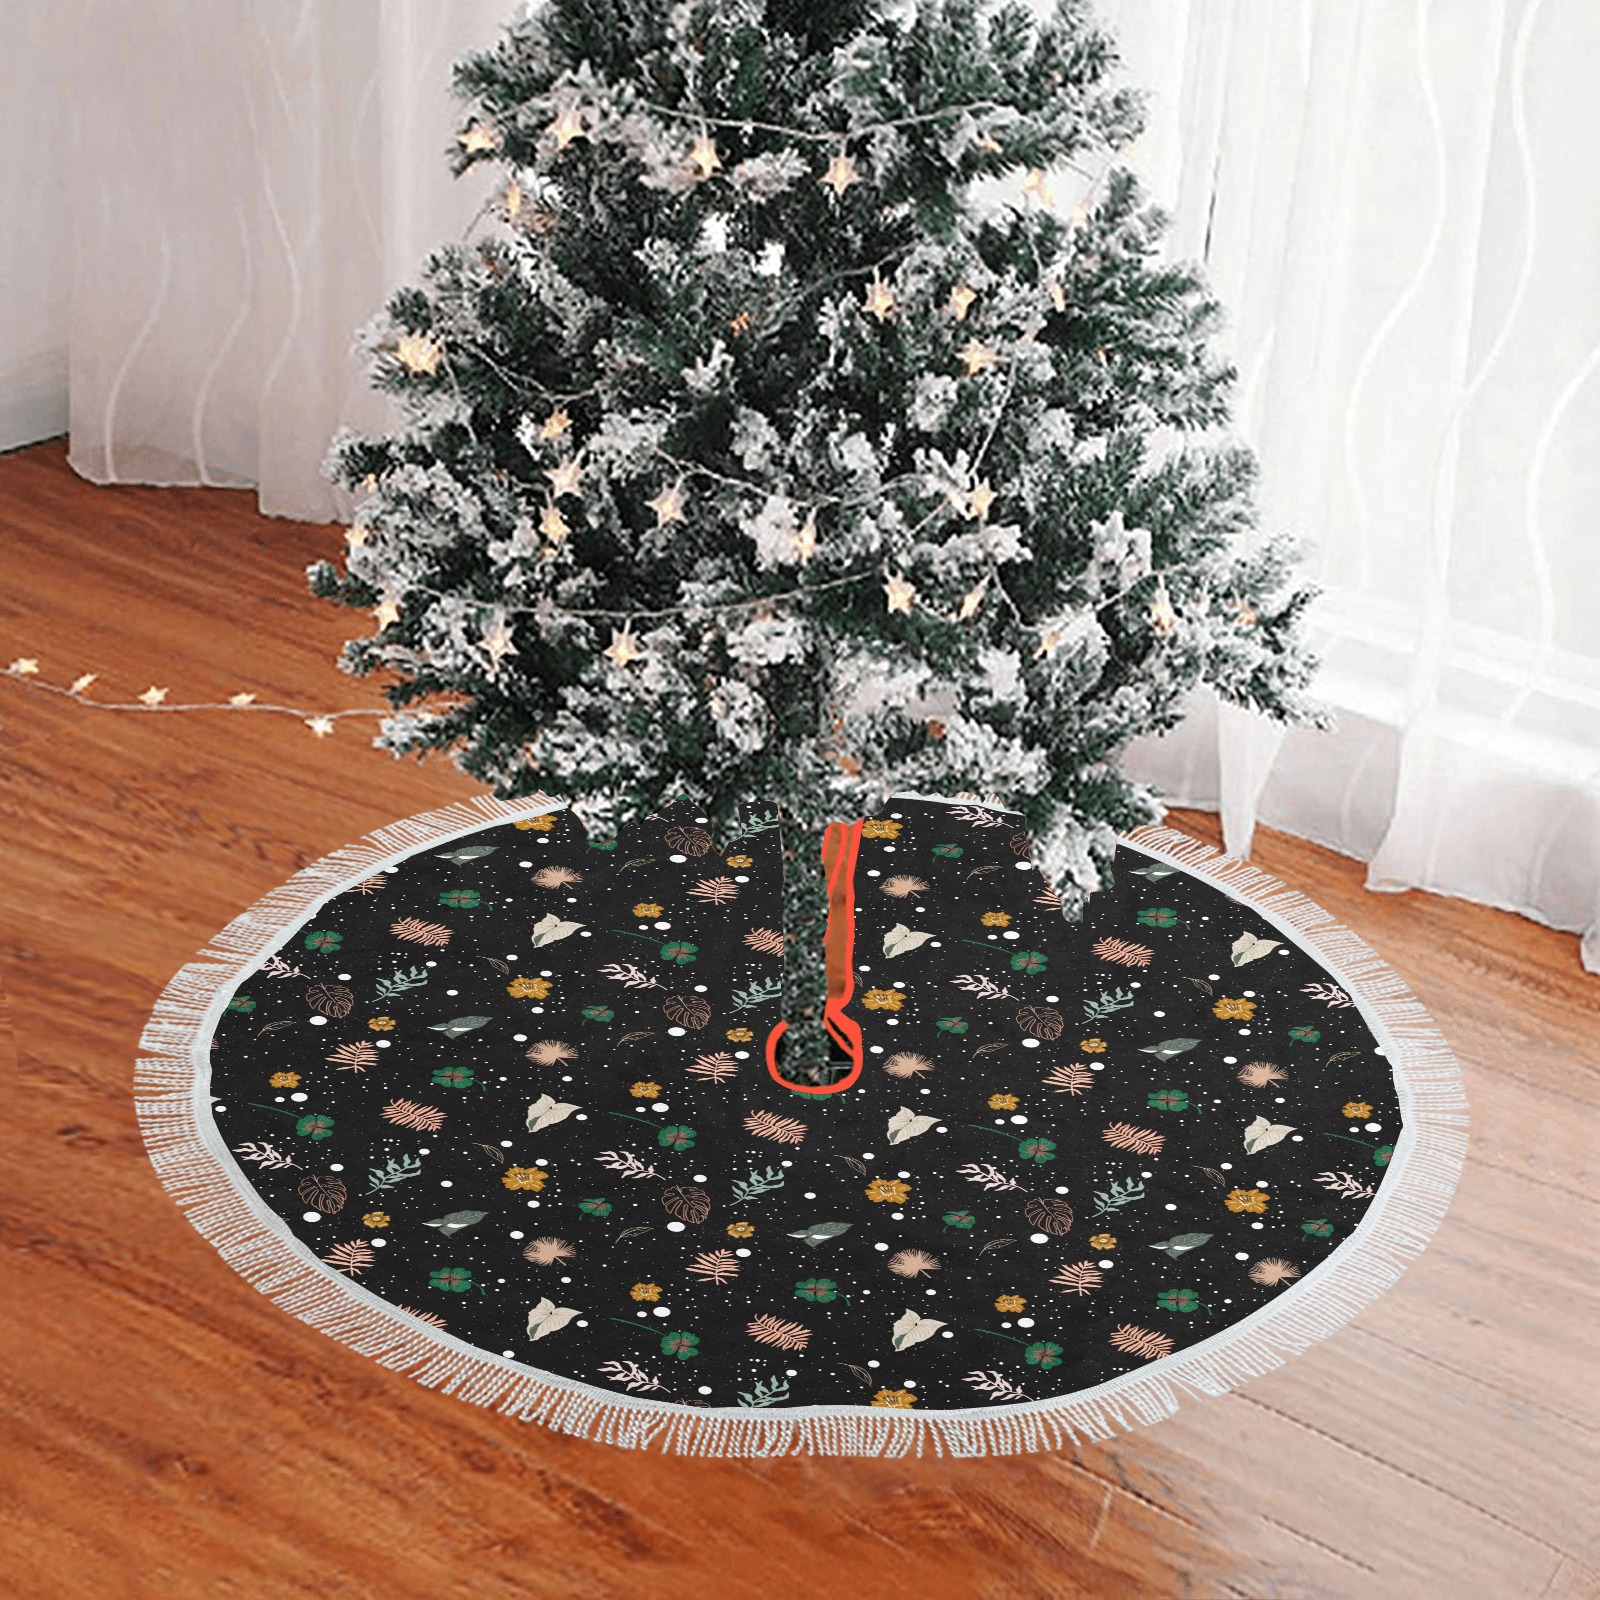 Lucky nature in space I Thick Fringe Christmas Tree Skirt 36"x36"